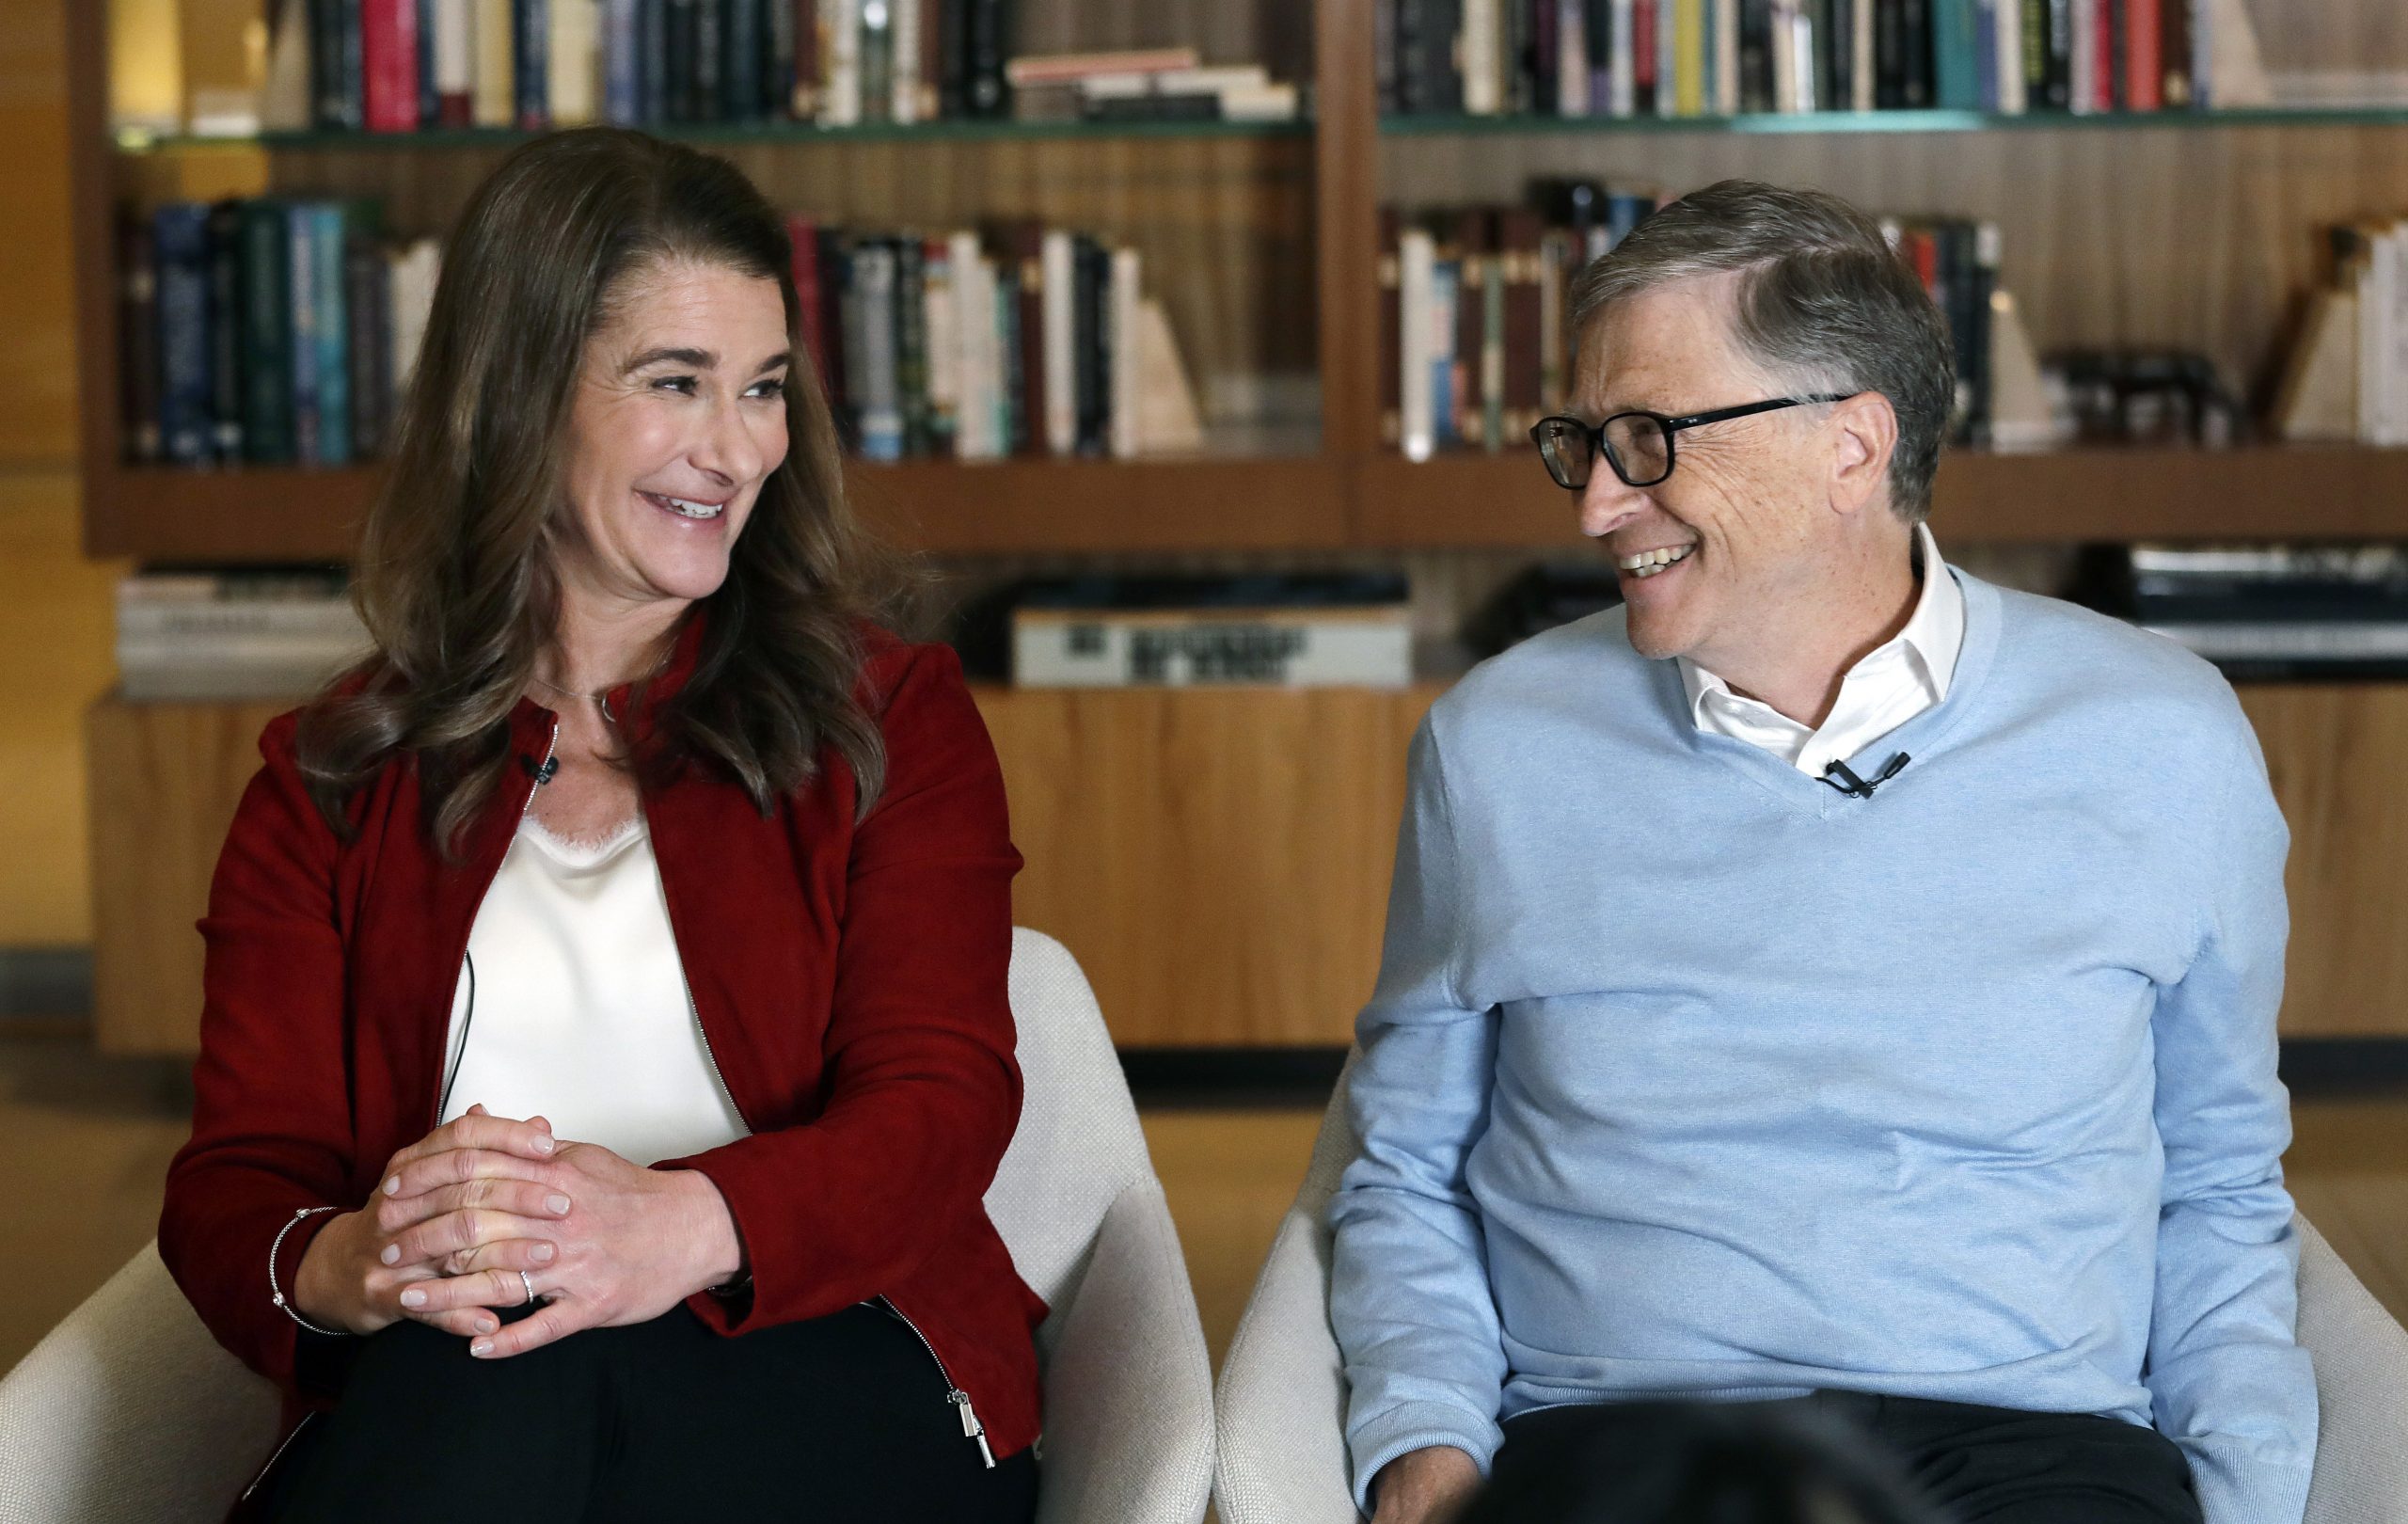  Bill and Melinda Gates look toward each other and smile while being interviewed in Kirkland, Wash. Associated Press